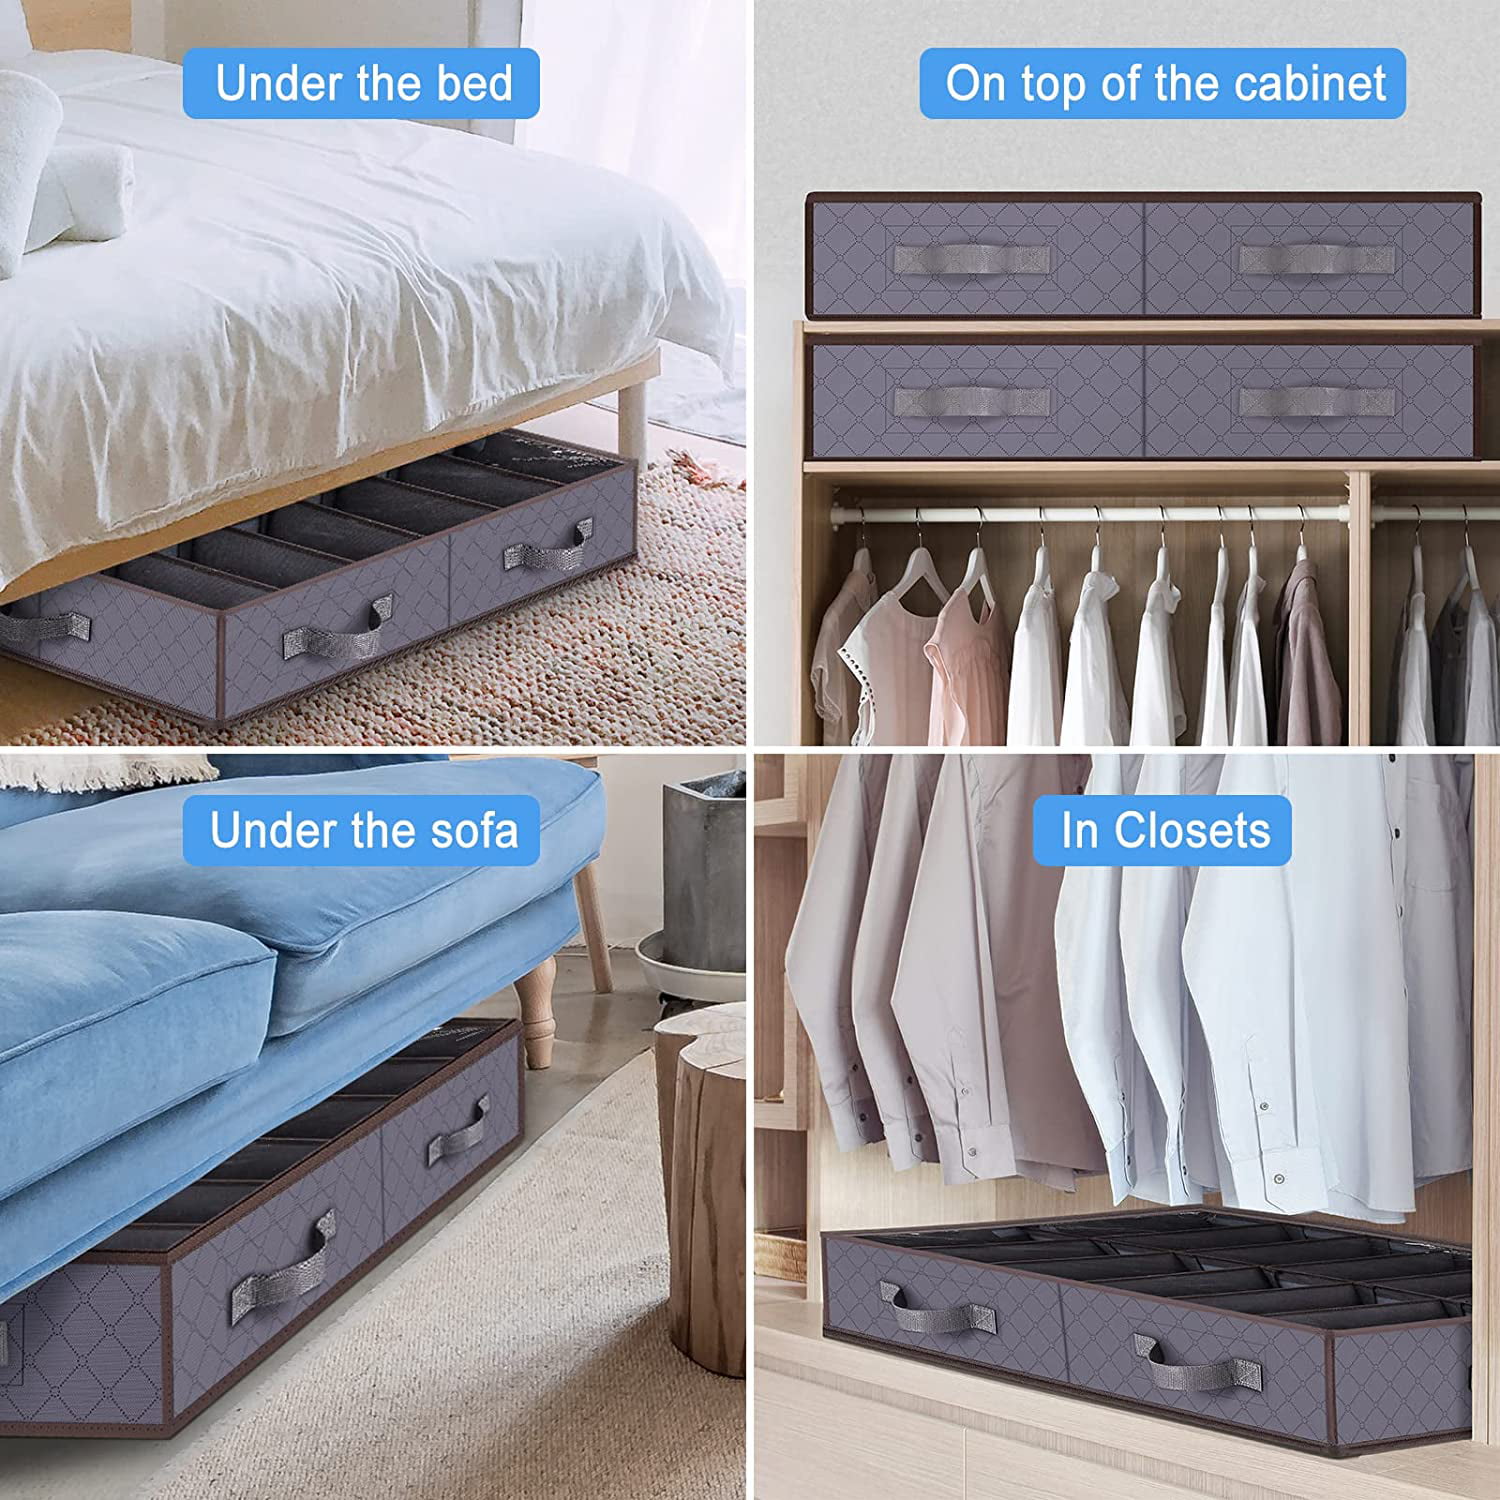 Details about   Anyoneer Under Bed Shoe Storage Sturdy Handles,Stainless Ste drawer organizers 